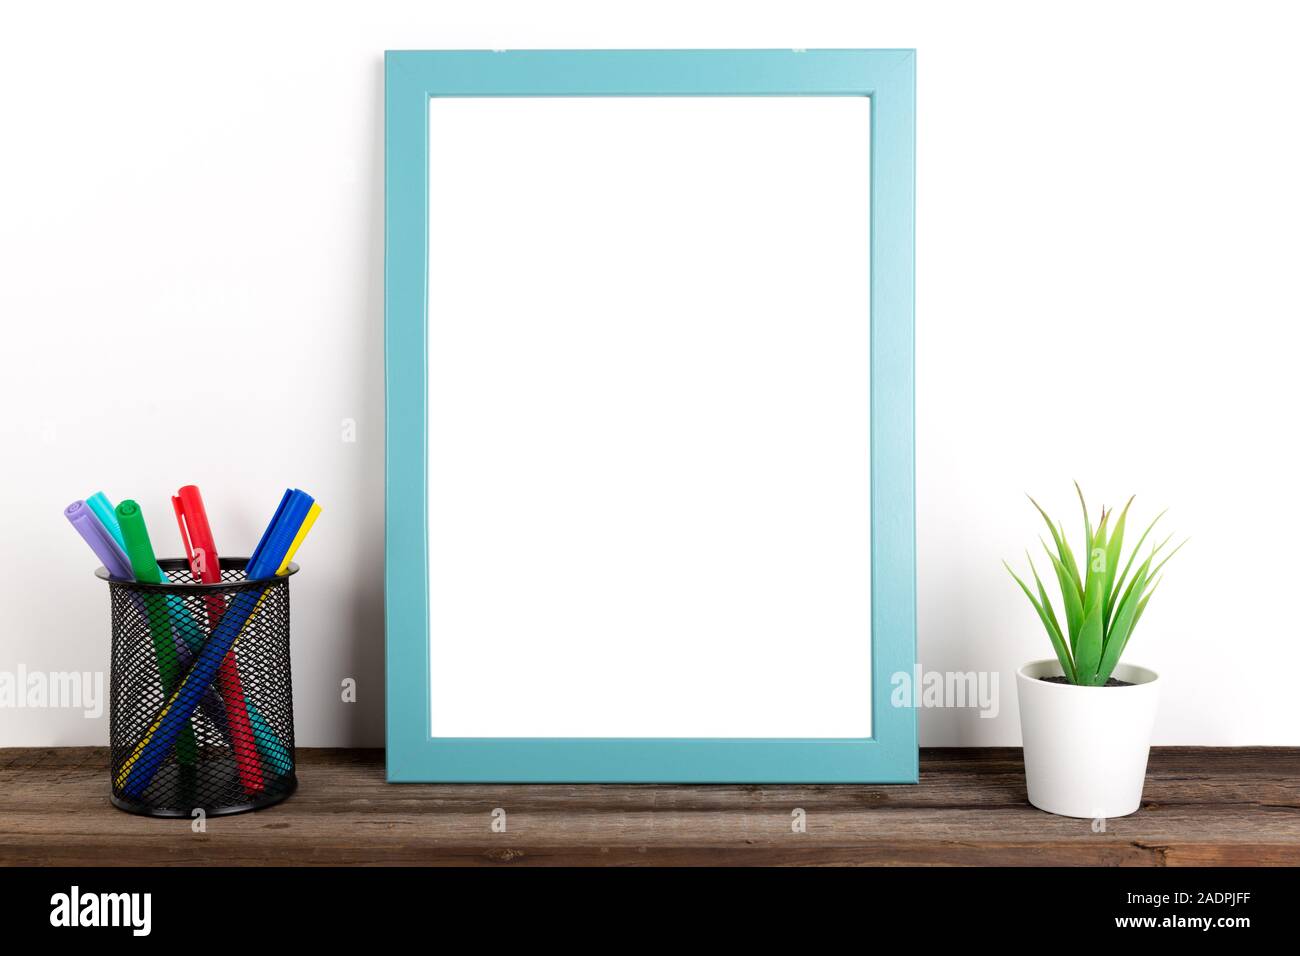 Interior poster mock up with vertical wooden frame, colored pencils and house plants on white wall background Stock Photo